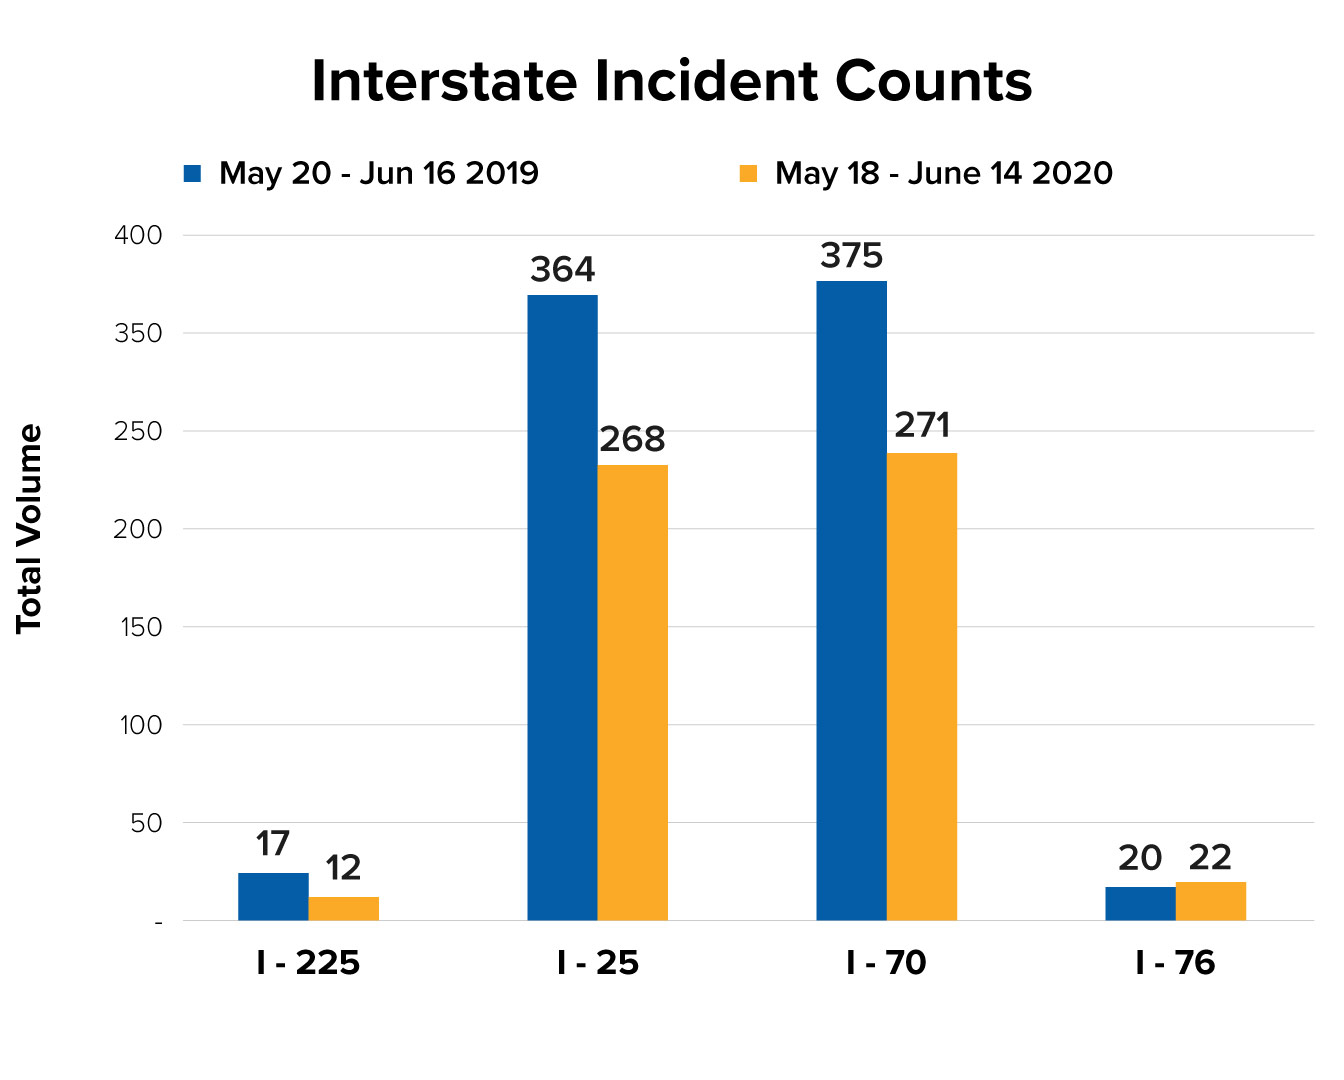 Interstate Incident Counts